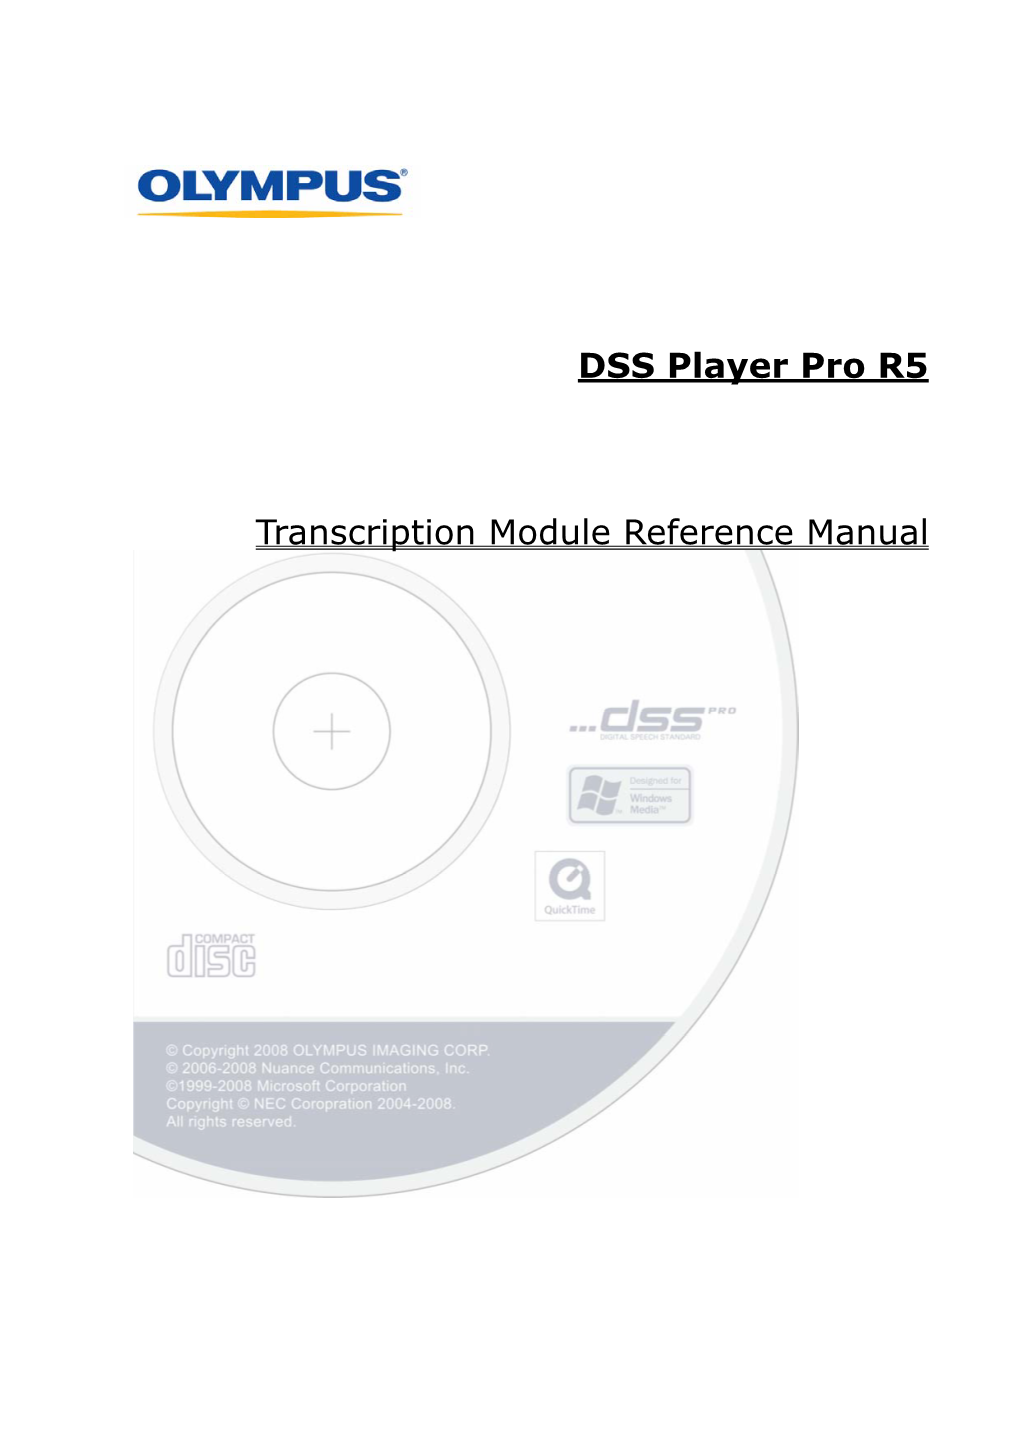 DSS Player Pro R5 Transcription Module Reference Manual